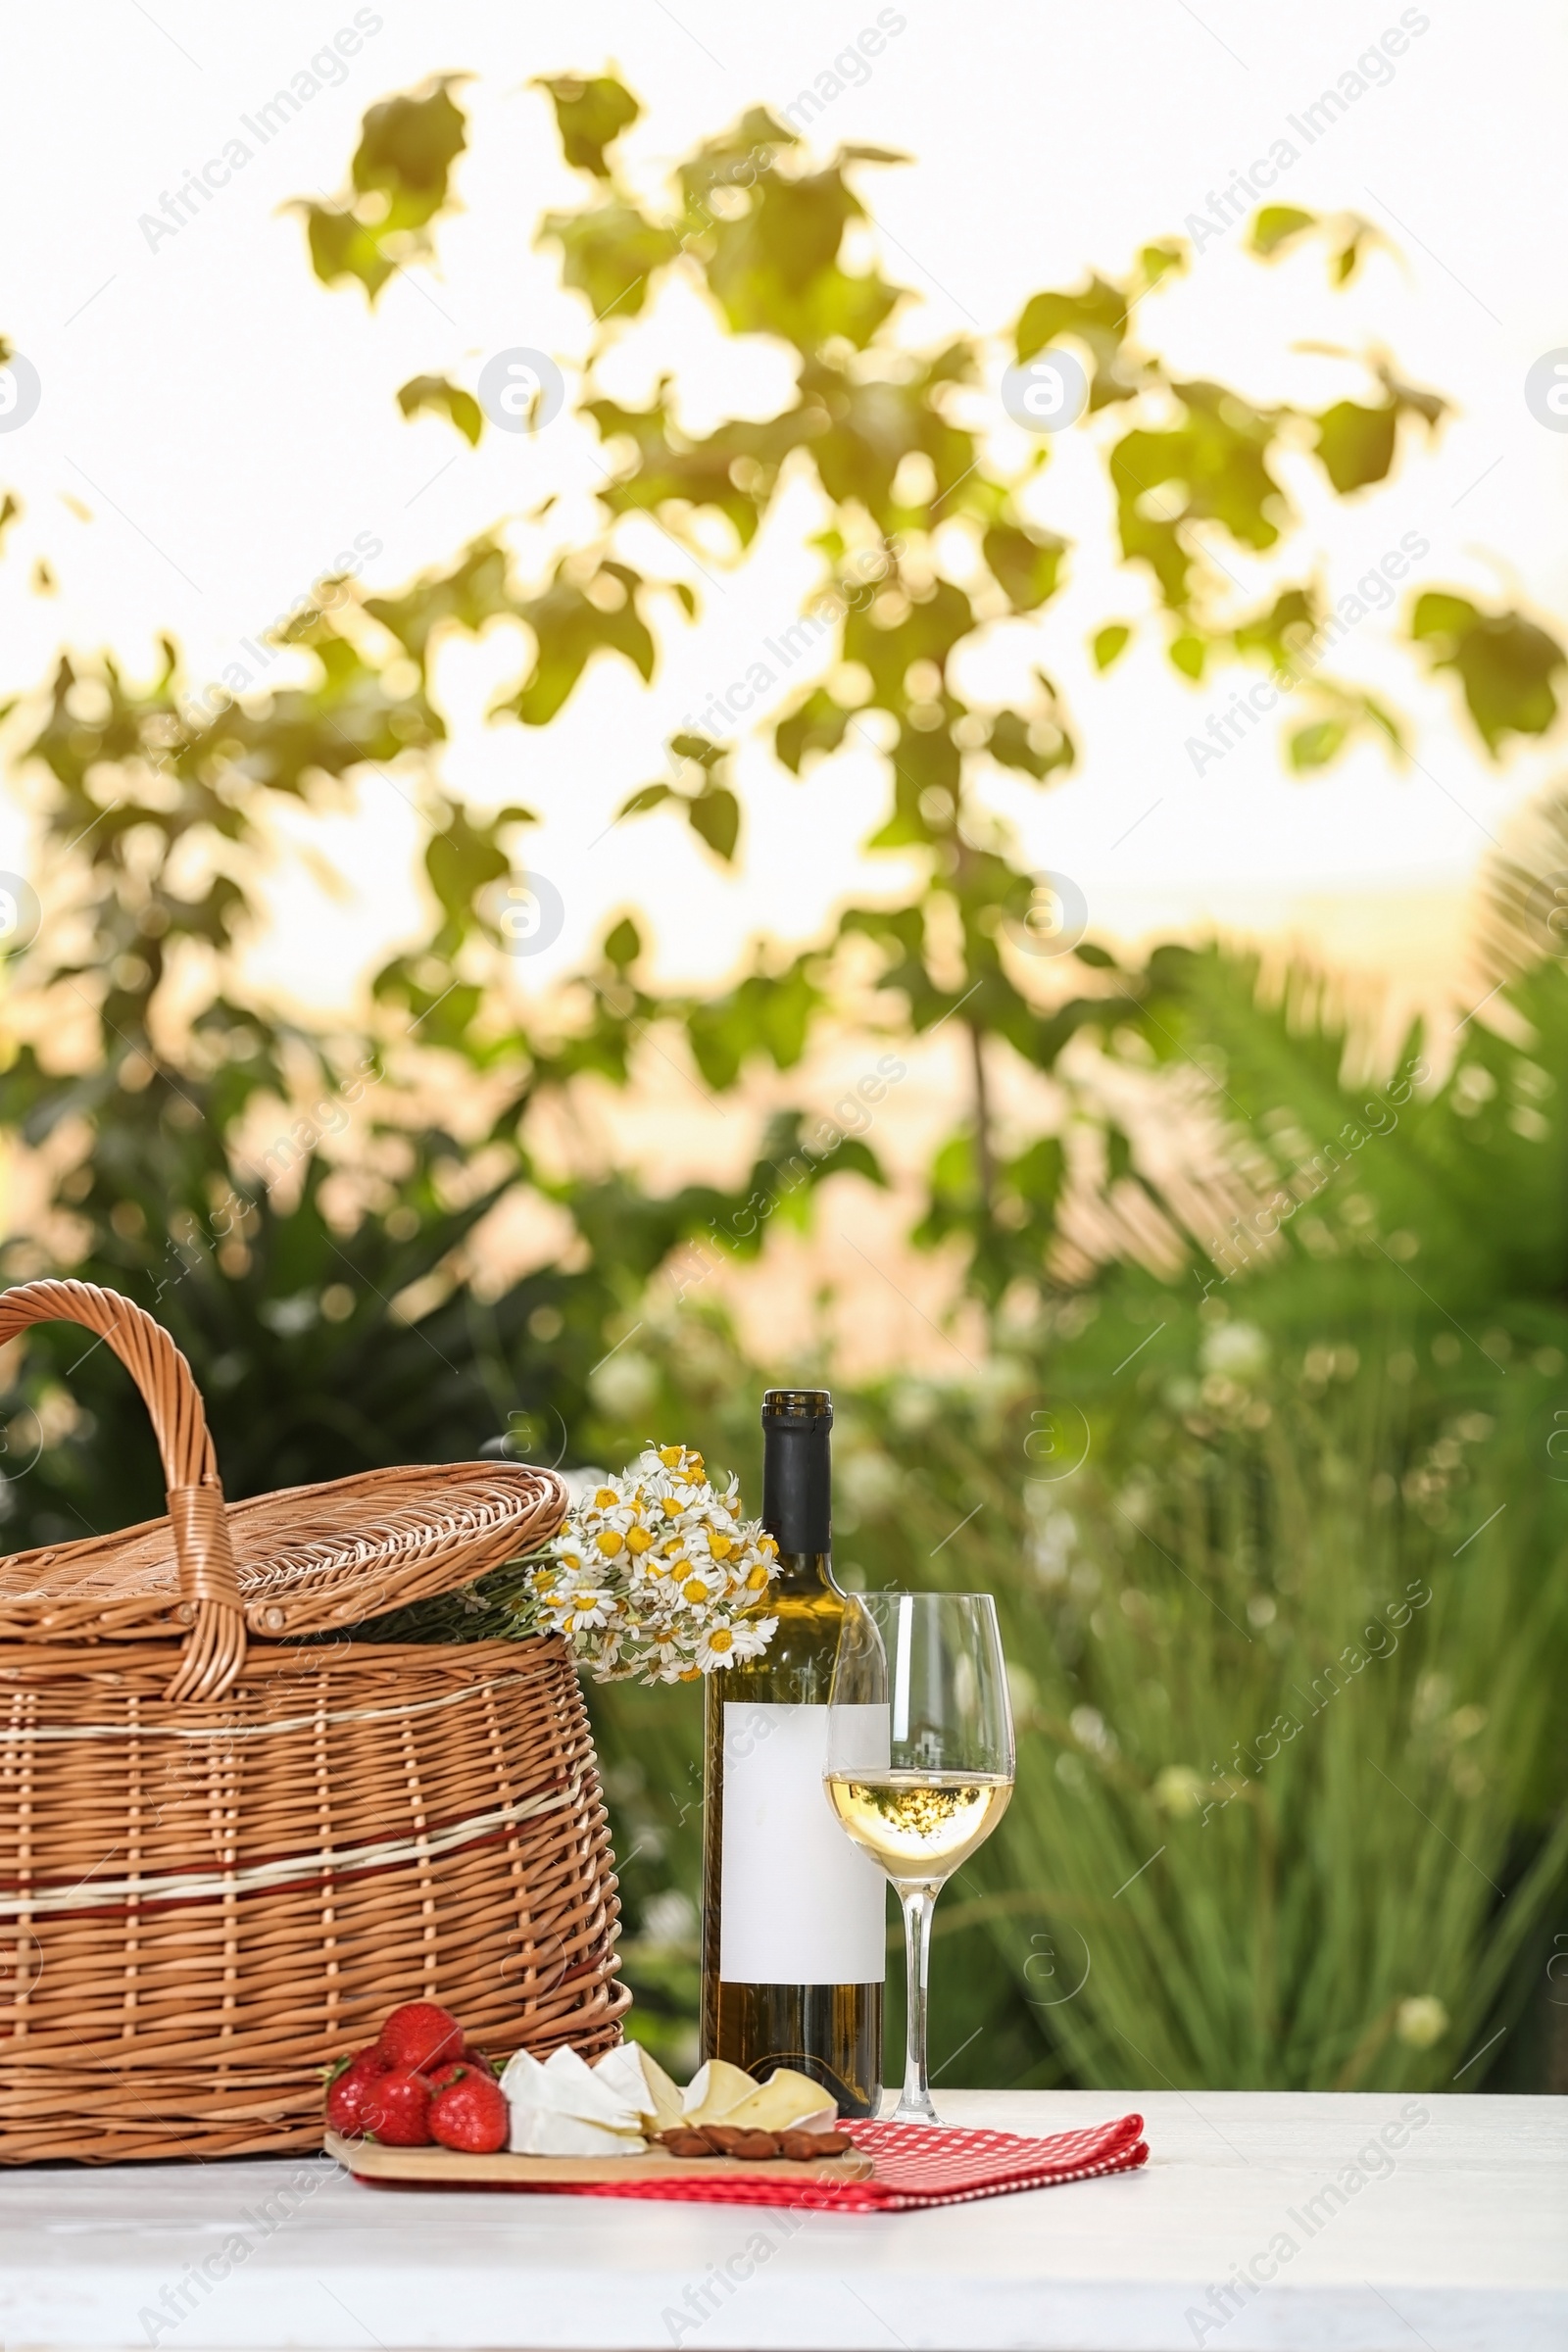 Photo of Picnic basket and wine with products on table against blurred background, space for text